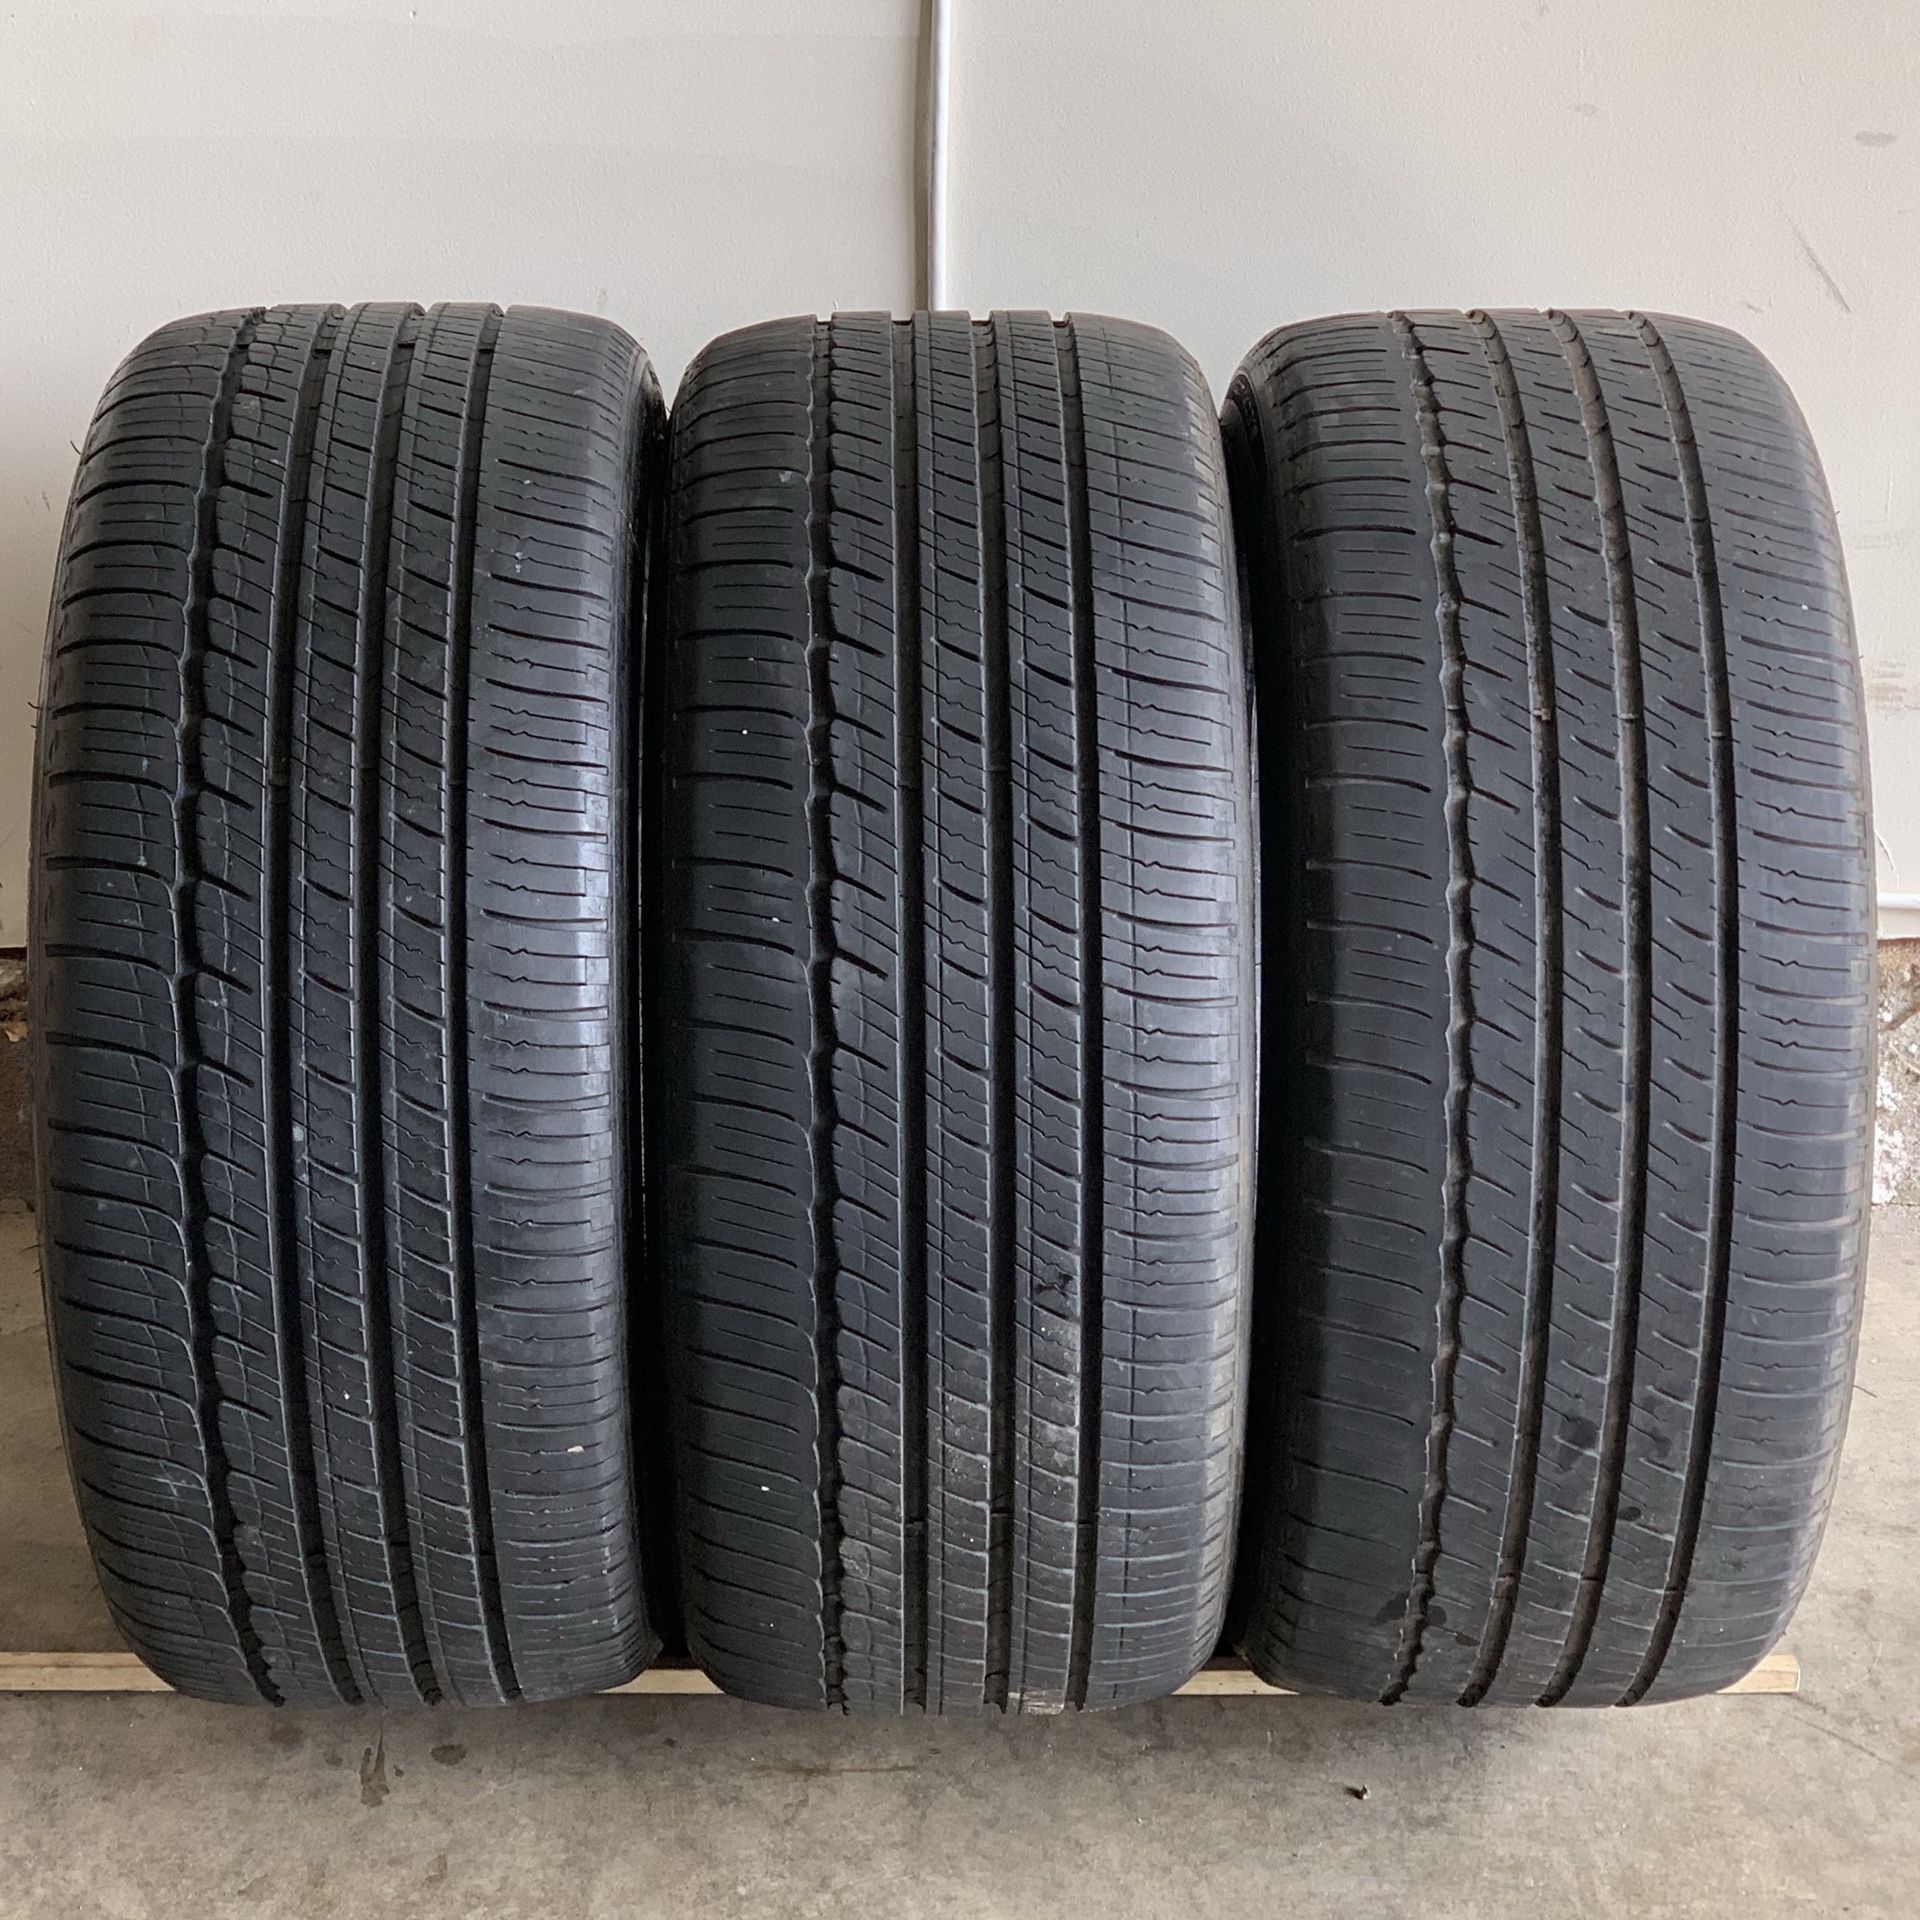 18" Michelin RUNFLAT 225/40R18 Tires (Set of 3 Price FIRM)